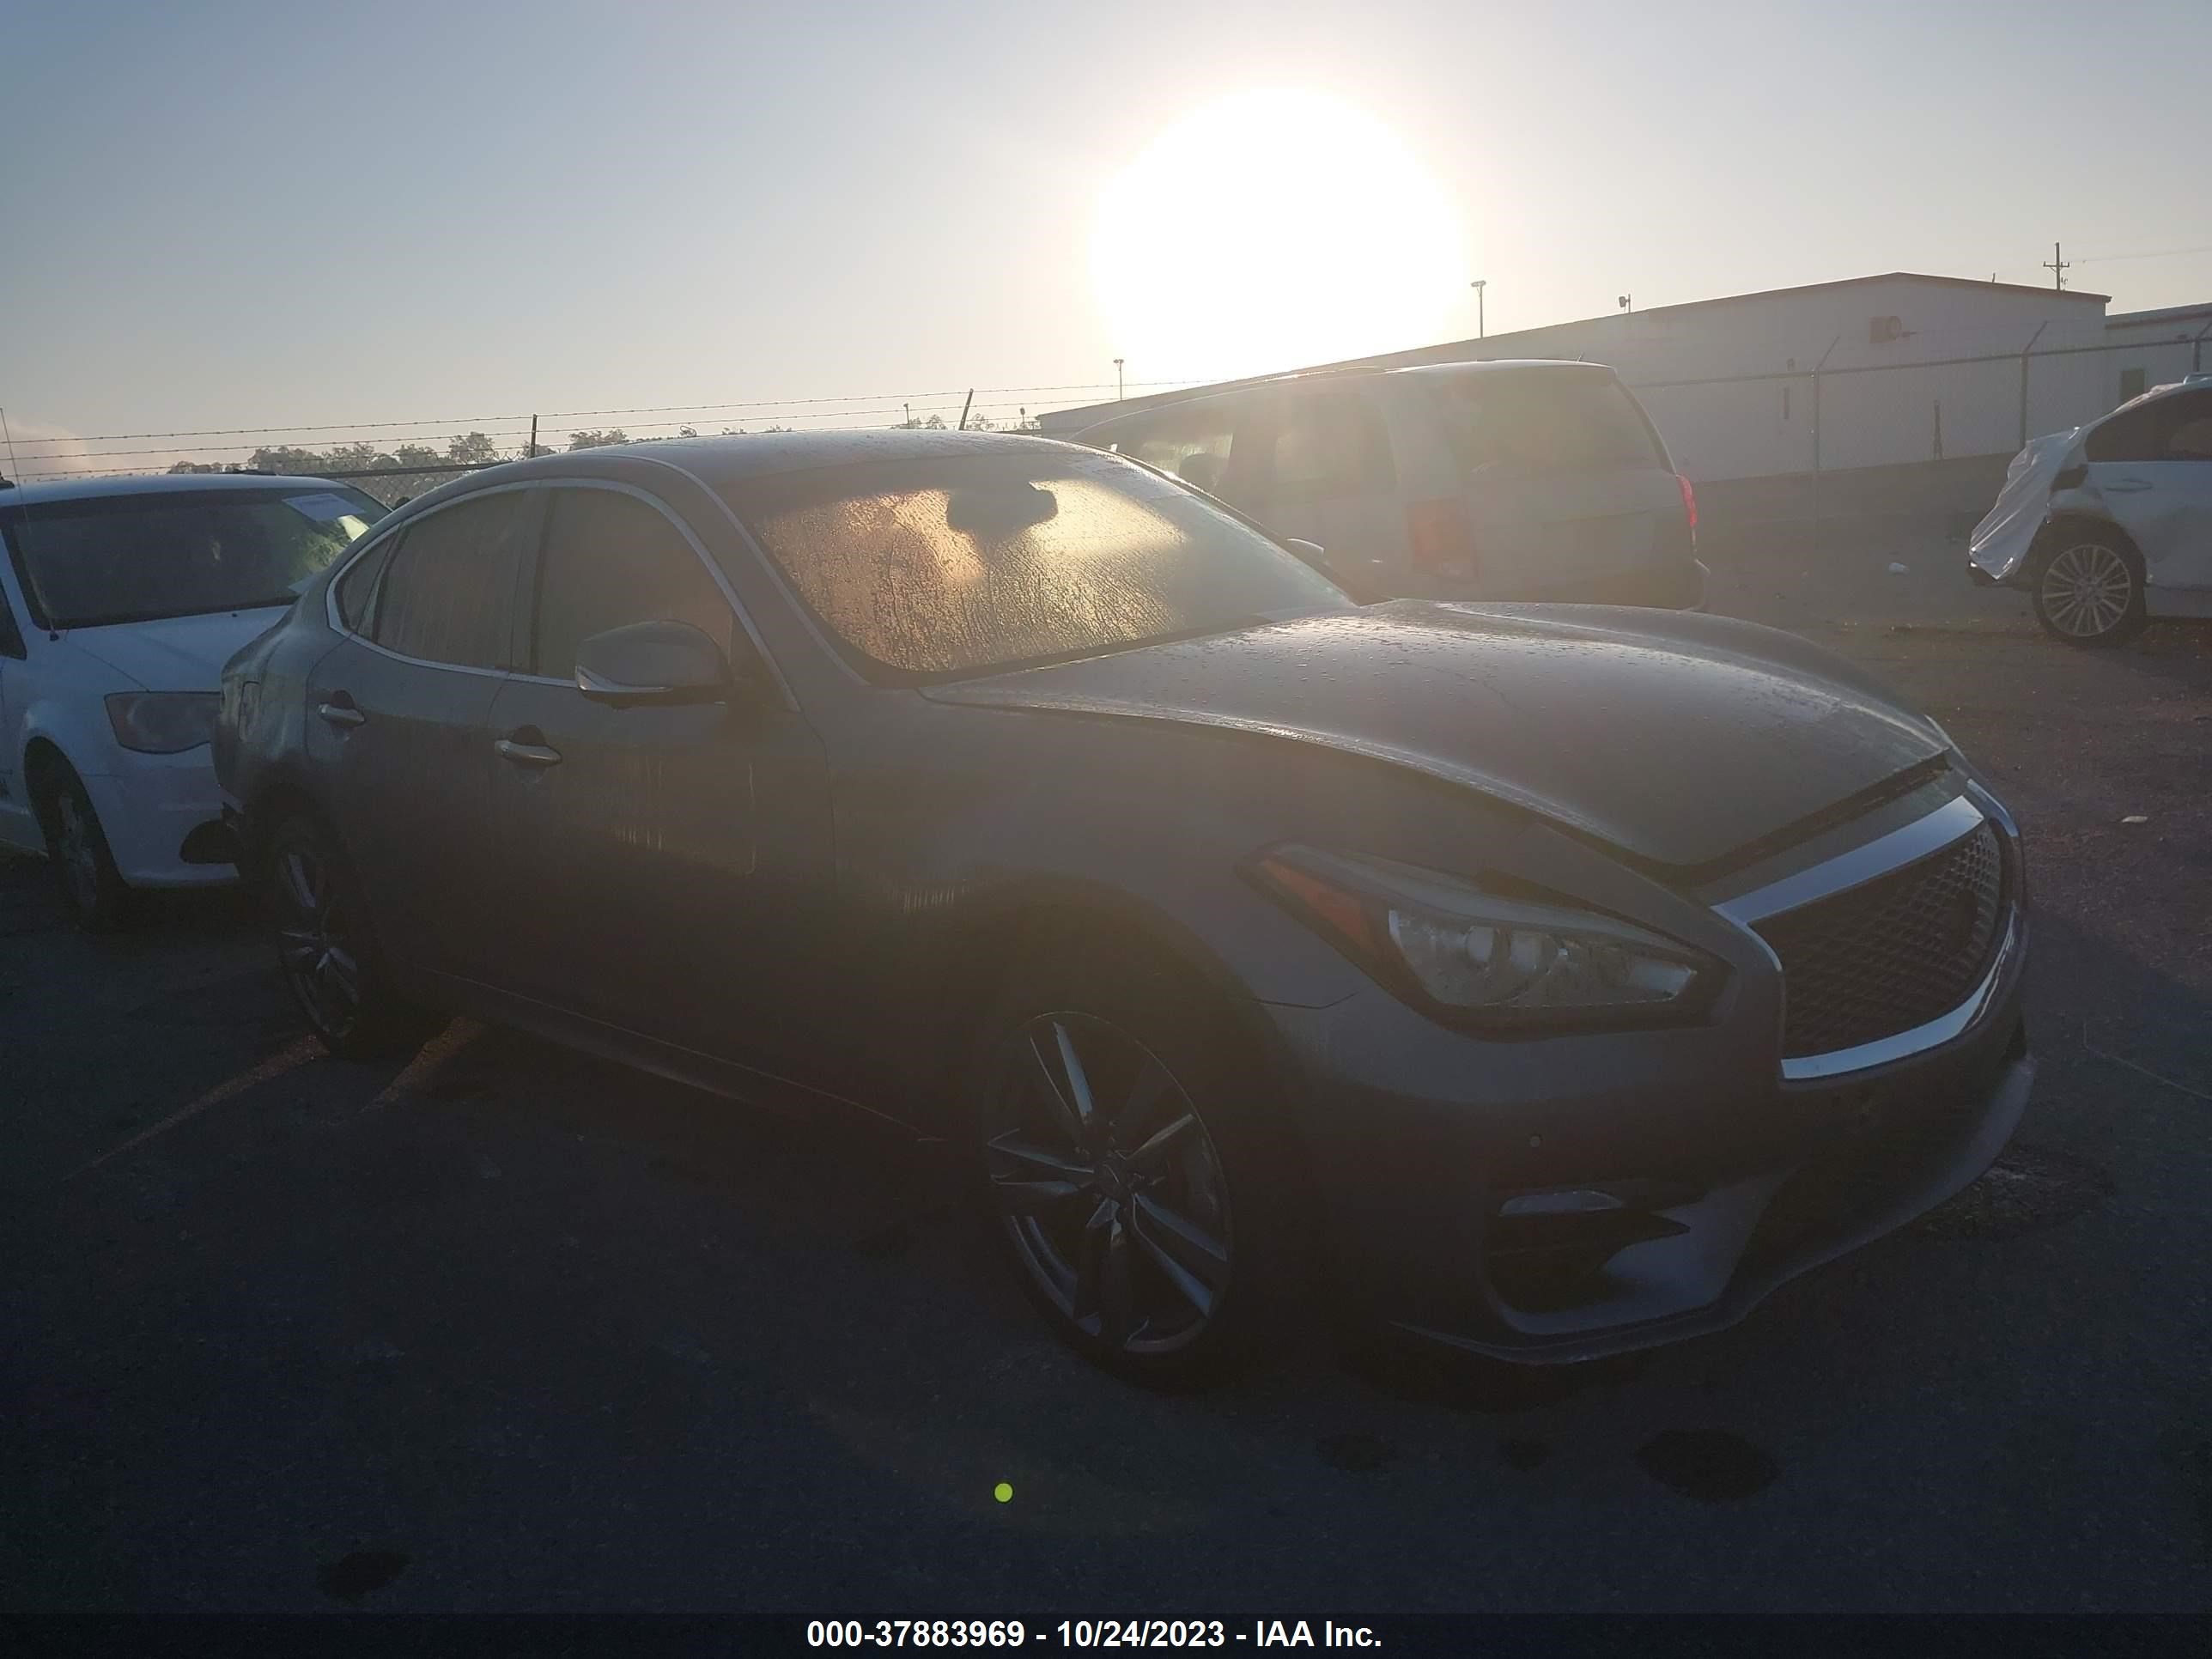 vin: JN1BY1AR3GM270088 JN1BY1AR3GM270088 2016 infiniti q70 3700 for Sale in 70721, 5978 Hwy 75, Carville, USA